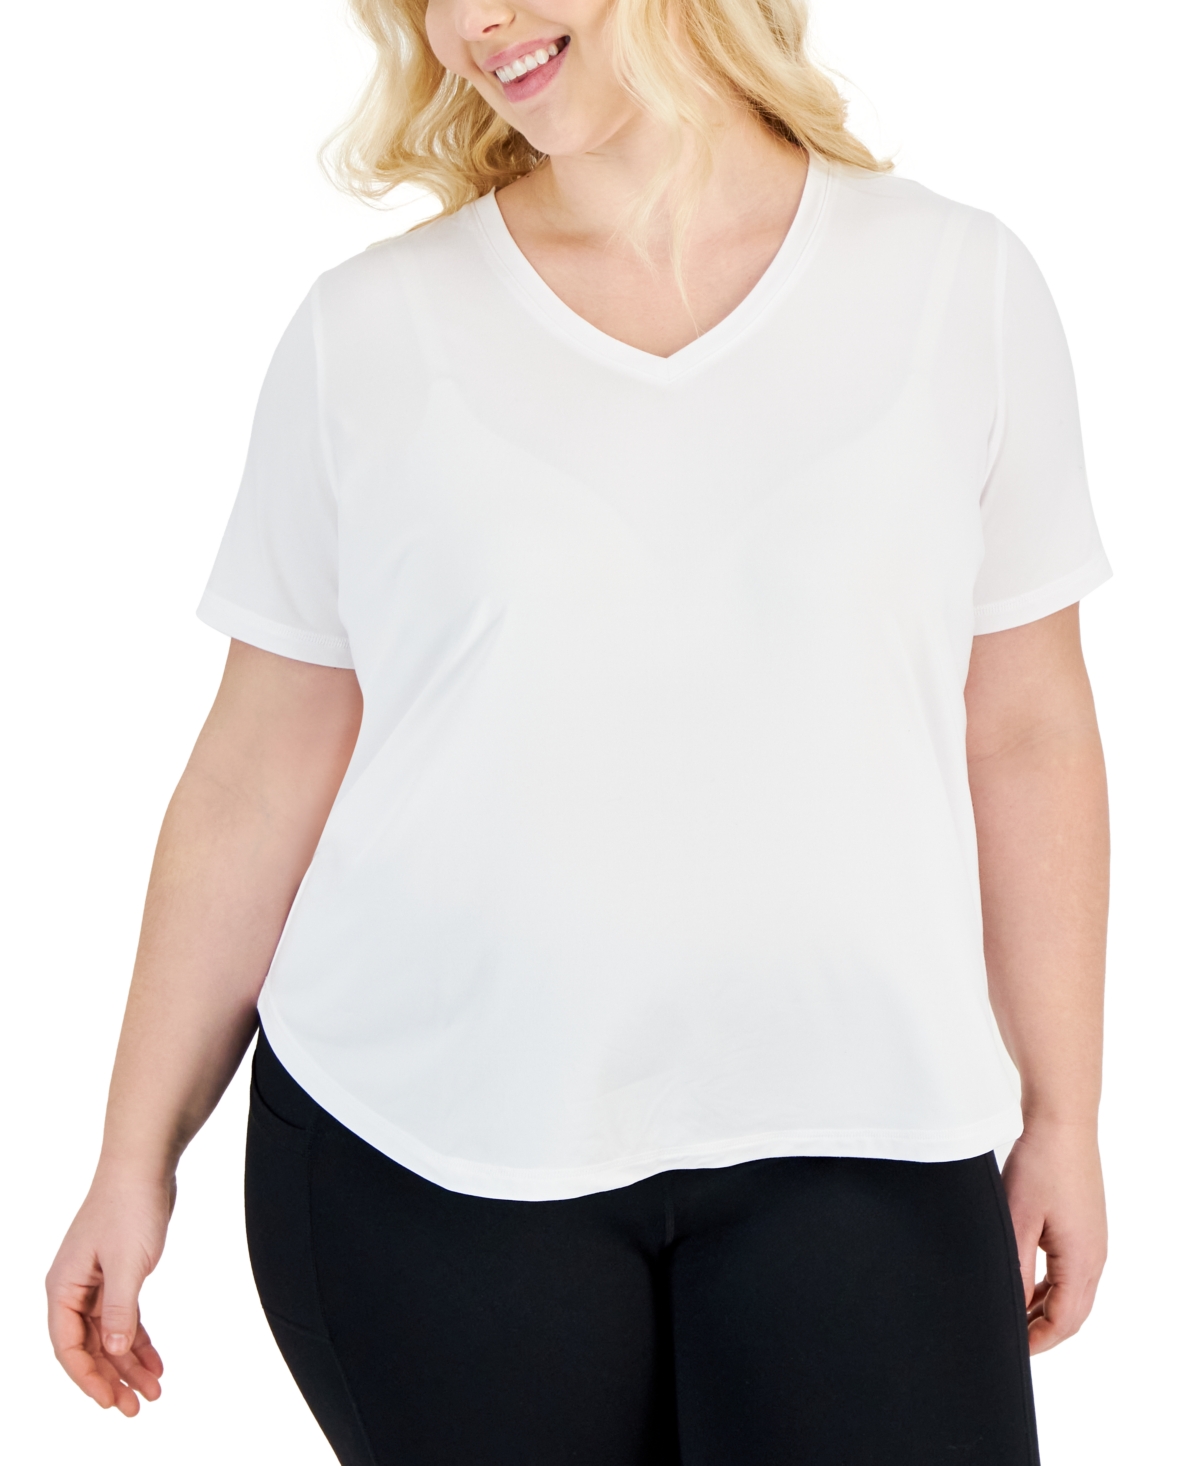 Plus Size Solid Essentials Active Tee, Created for Macy's - Bright White